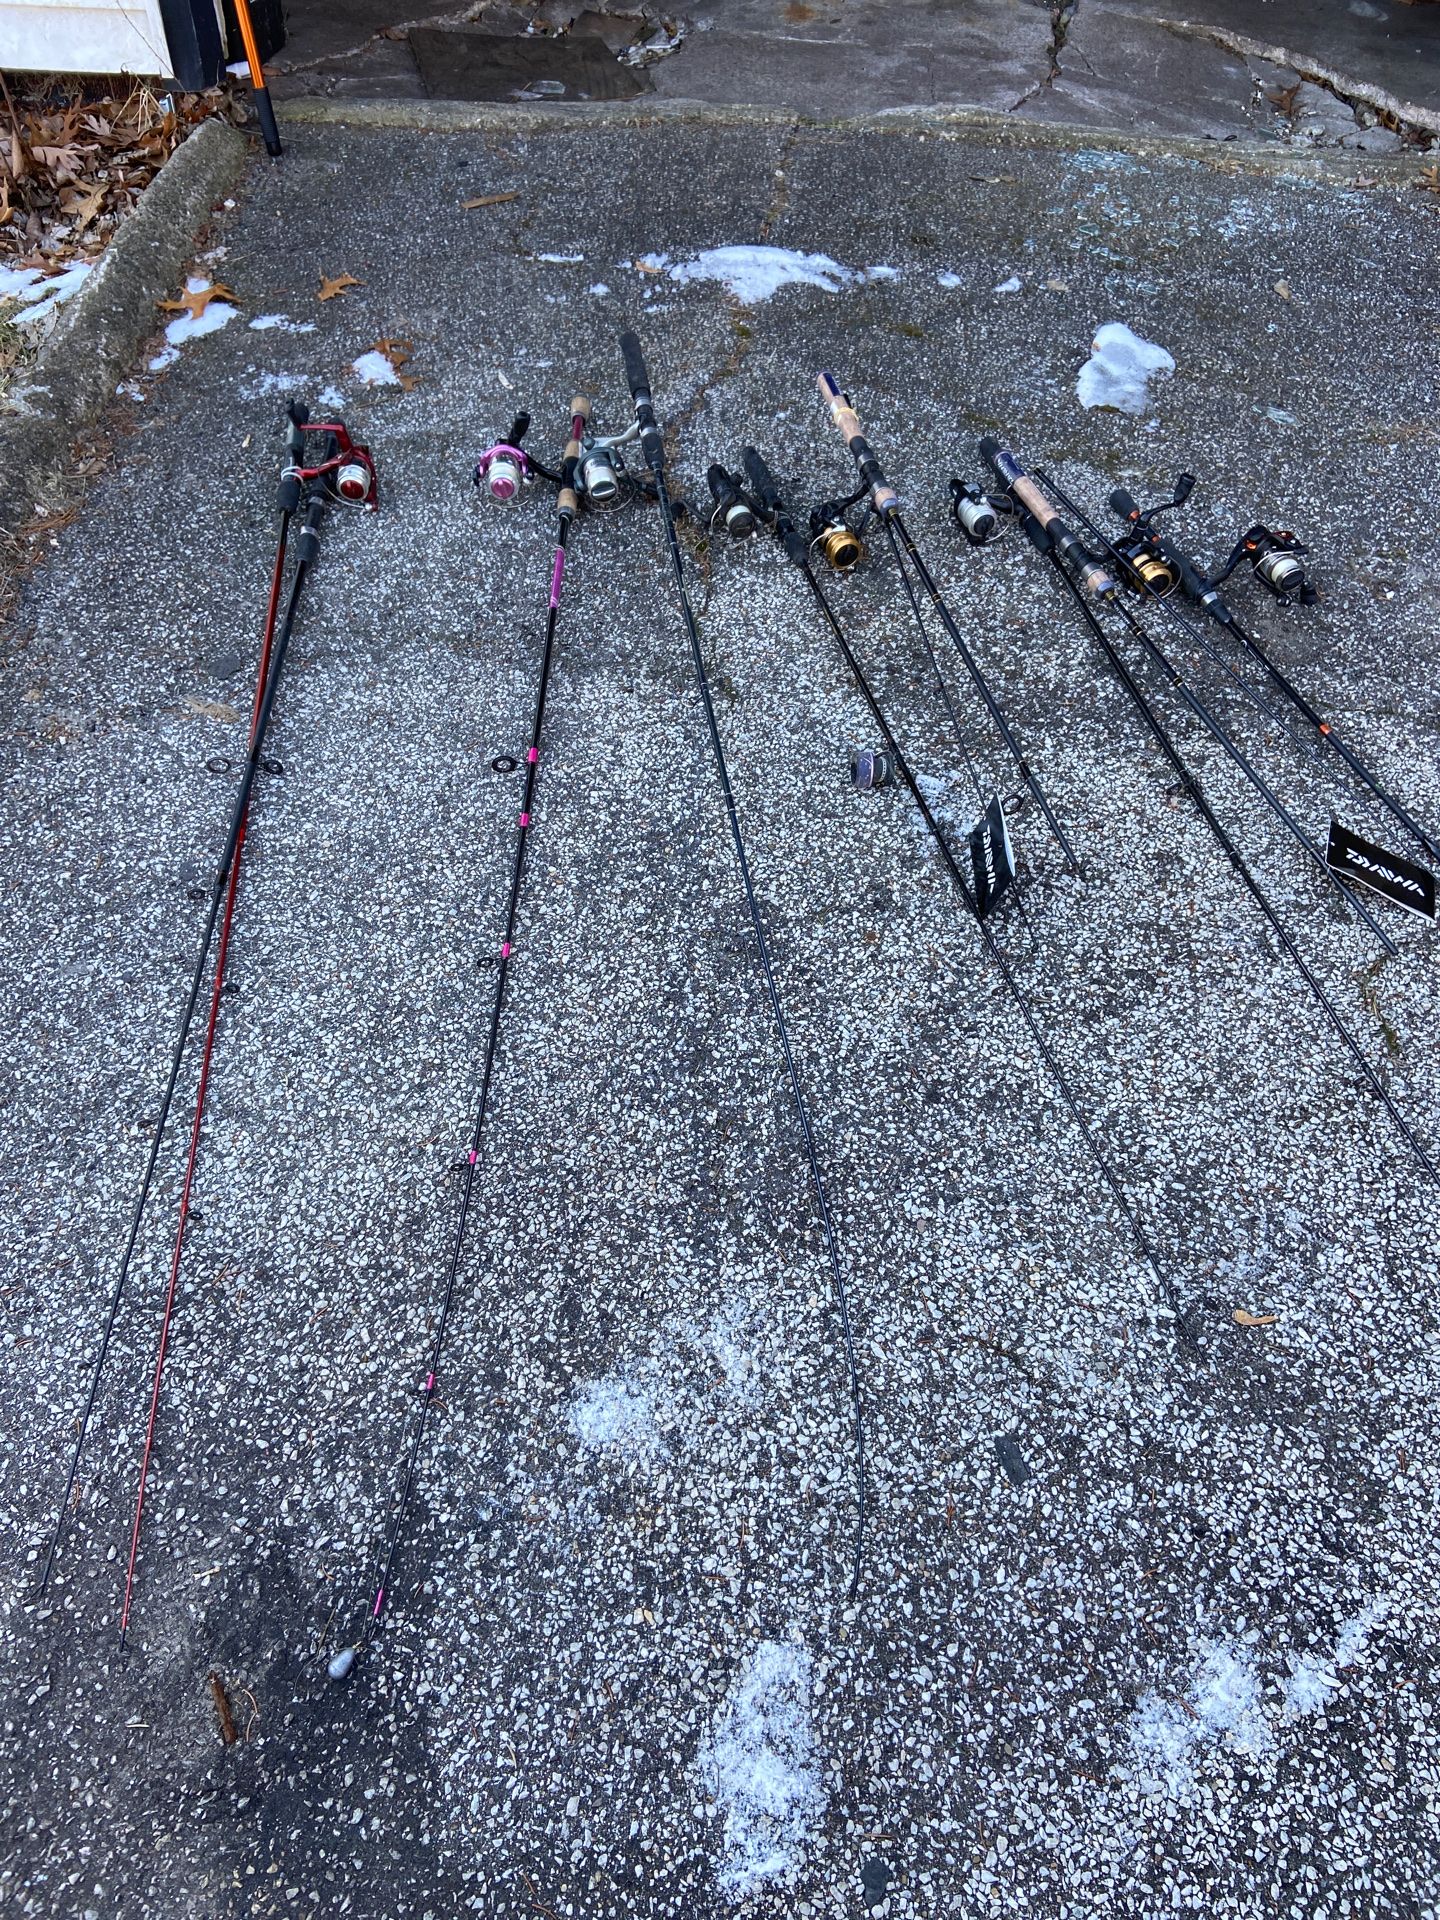 13 fishing rods are in good condition